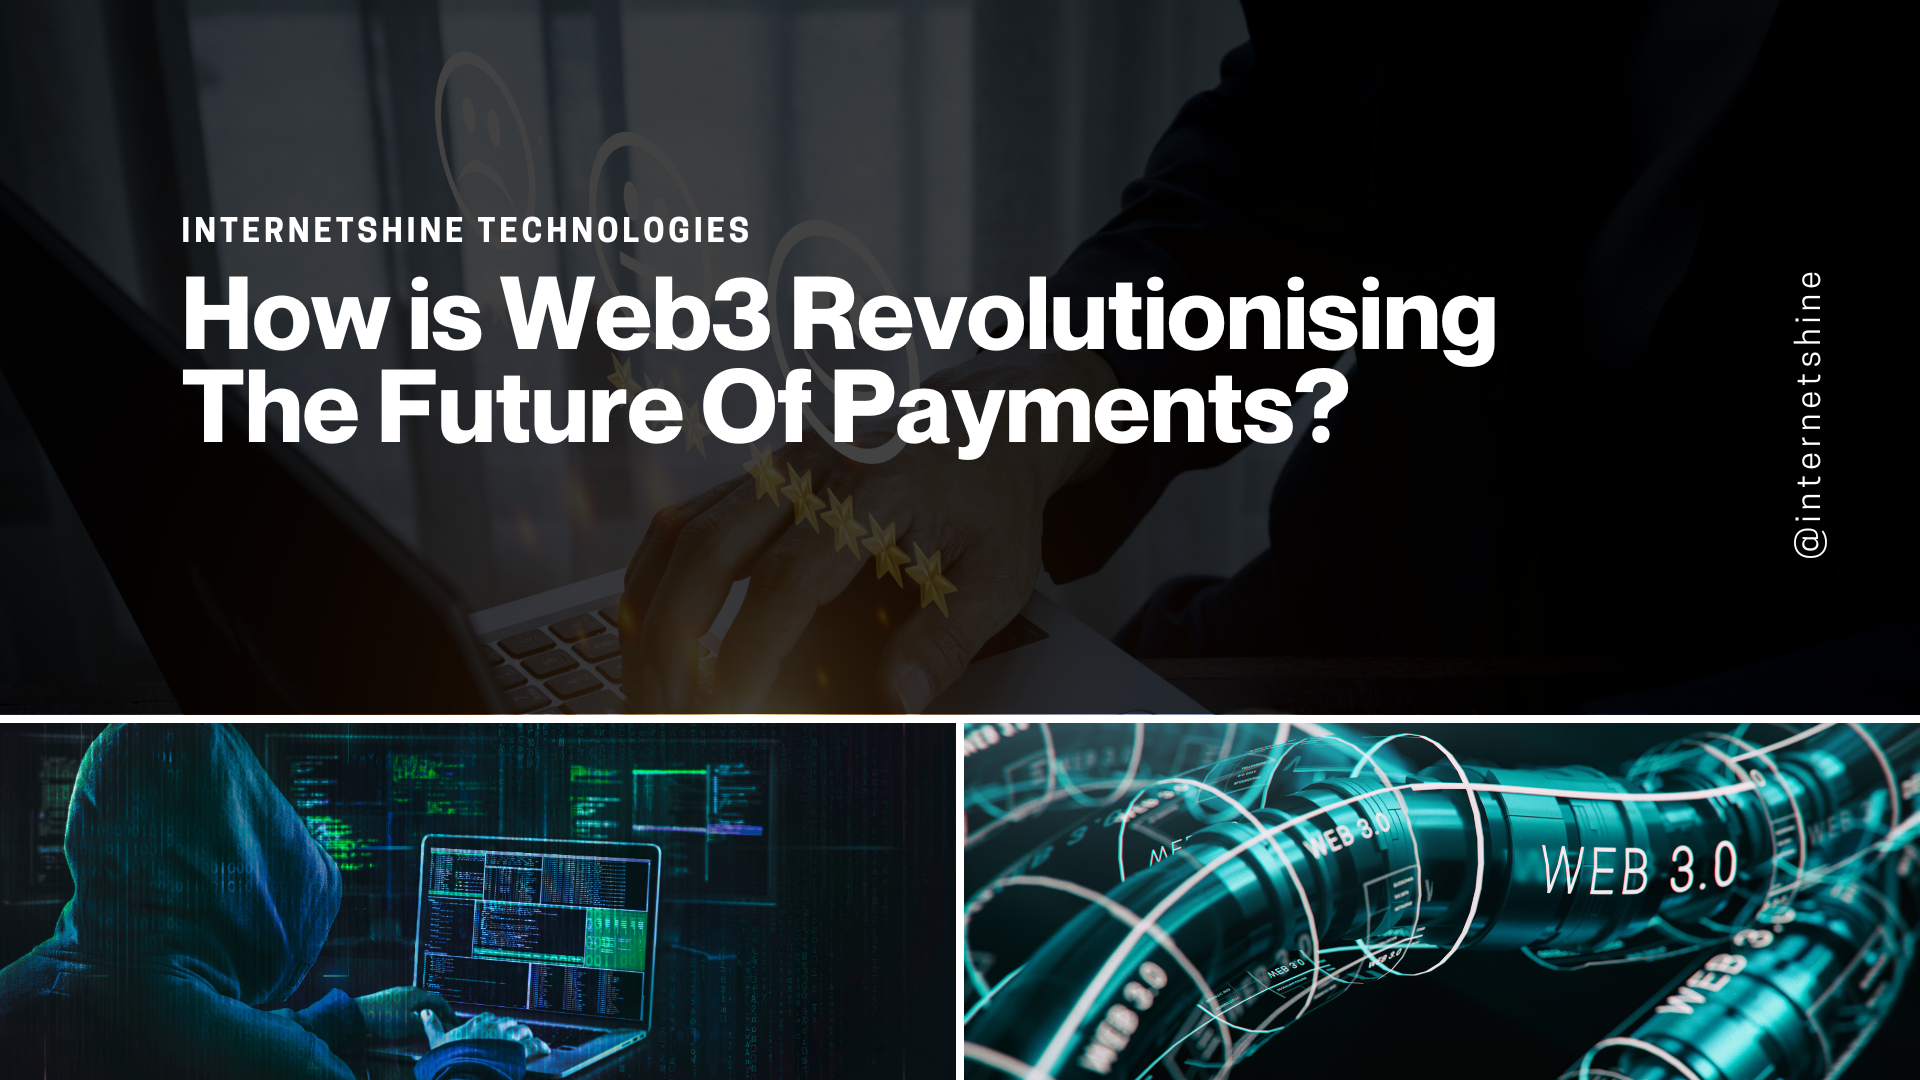 How Web3 is Revolutionising the Future of Payments